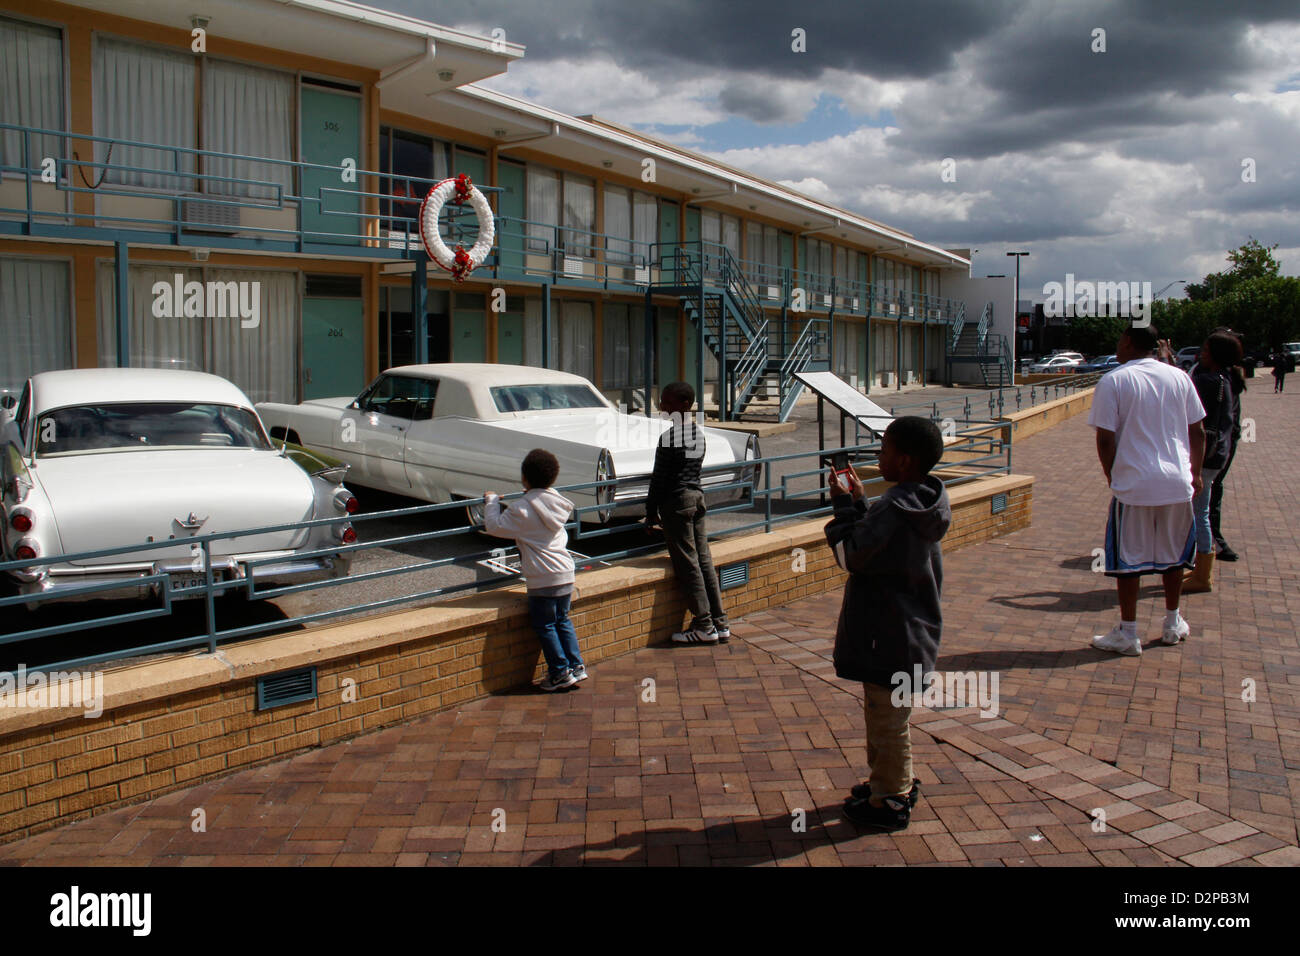 Lorraine Motel memorial National Civil Rights Museum Room 306 Martin Luther King Jr. was assassination site Memphis Tennessee Stock Photo